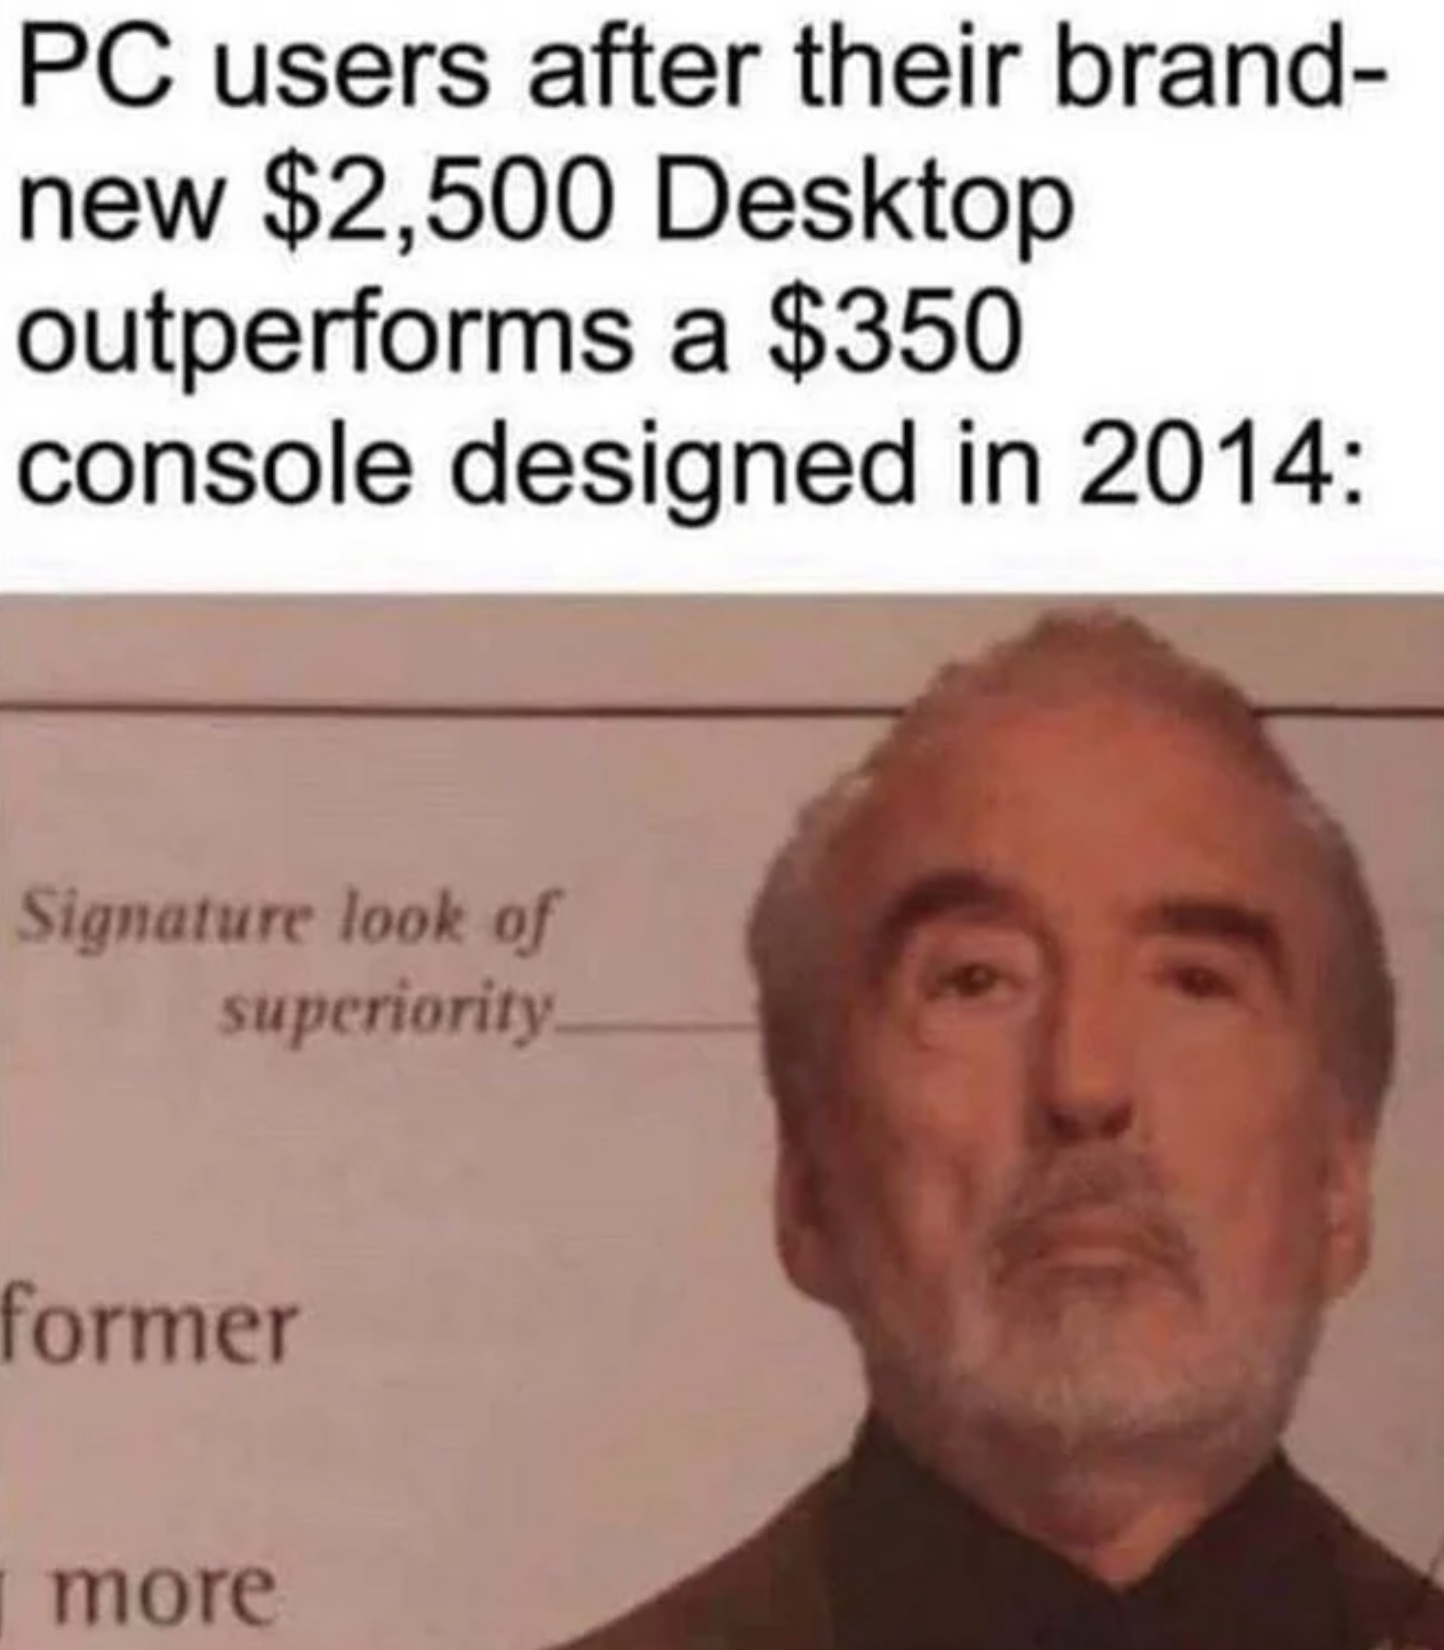 pc look of superiority - Pc users after their brand new $2,500 Desktop outperforms a $350 console designed in 2014 Signature look of superiority former more